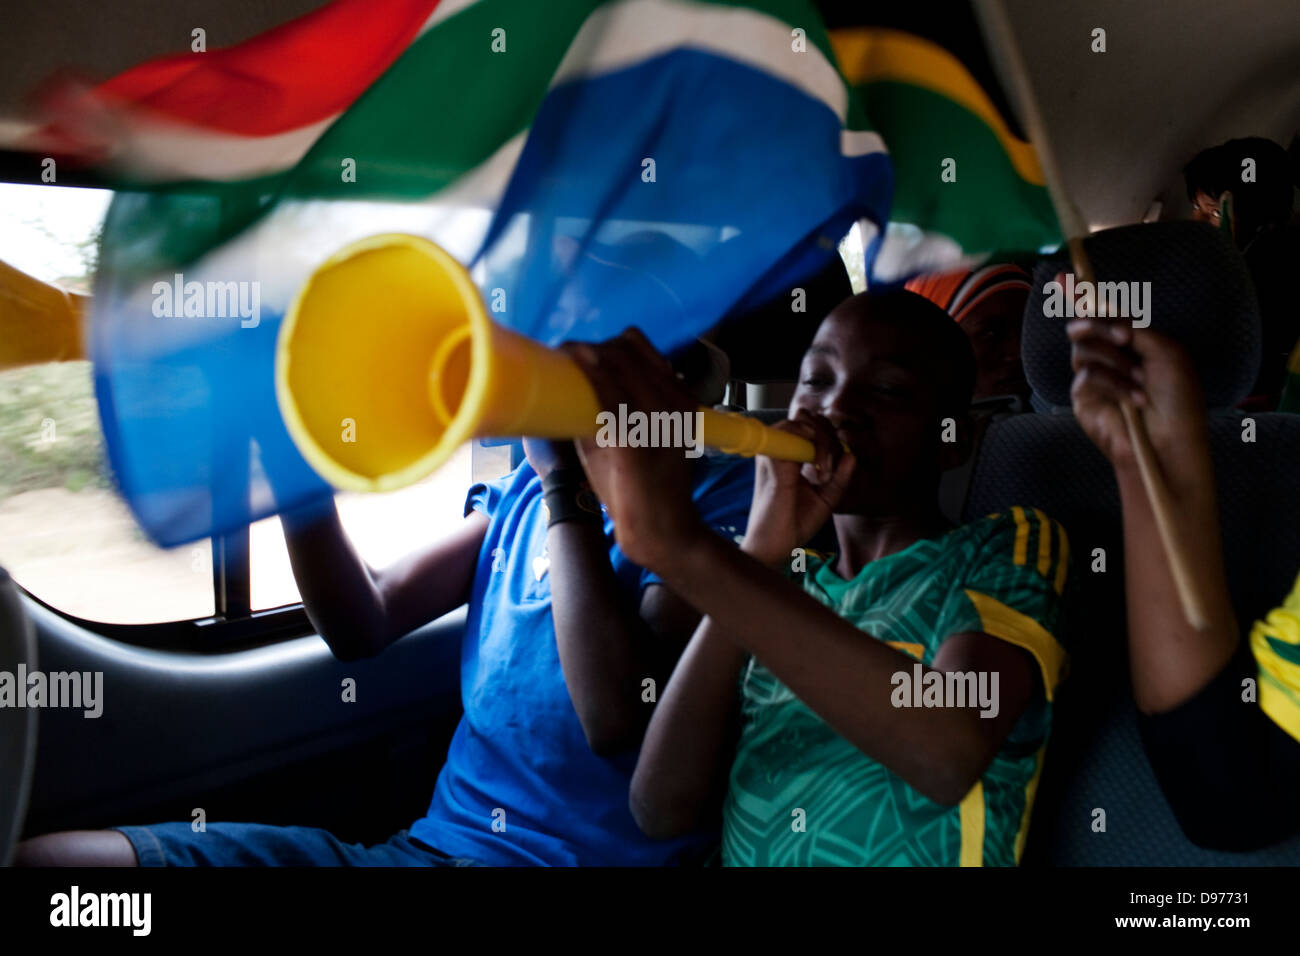 Football fans blow vuvuzelas wave South African flag in taxi They on way to fan park viewing site to watch on large television Stock Photo